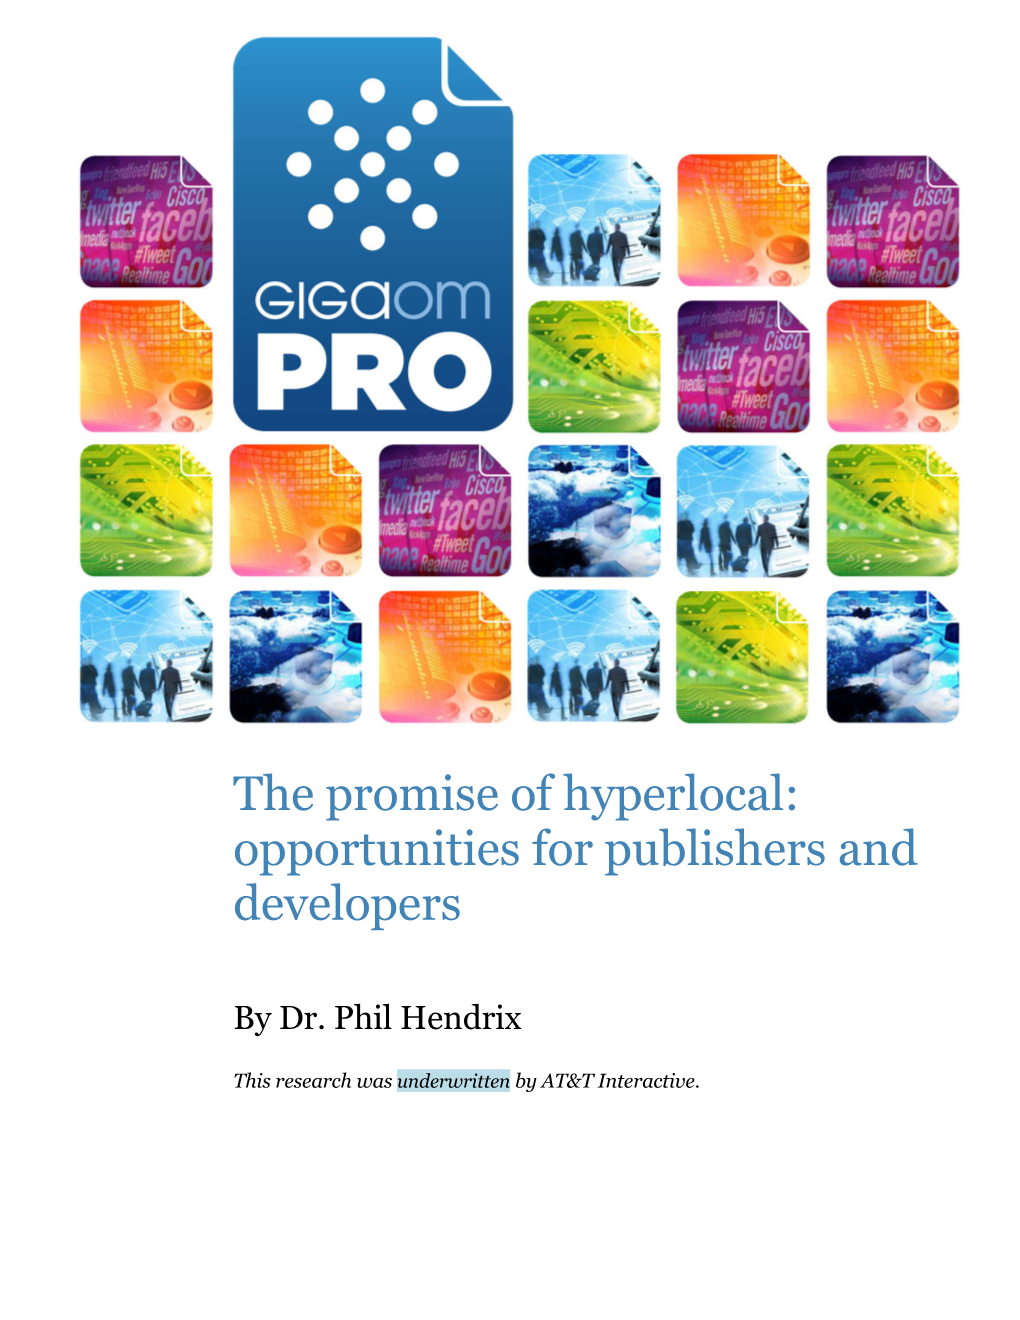 The Promise of Hyperlocal: Opportunities for Publishers and Developers